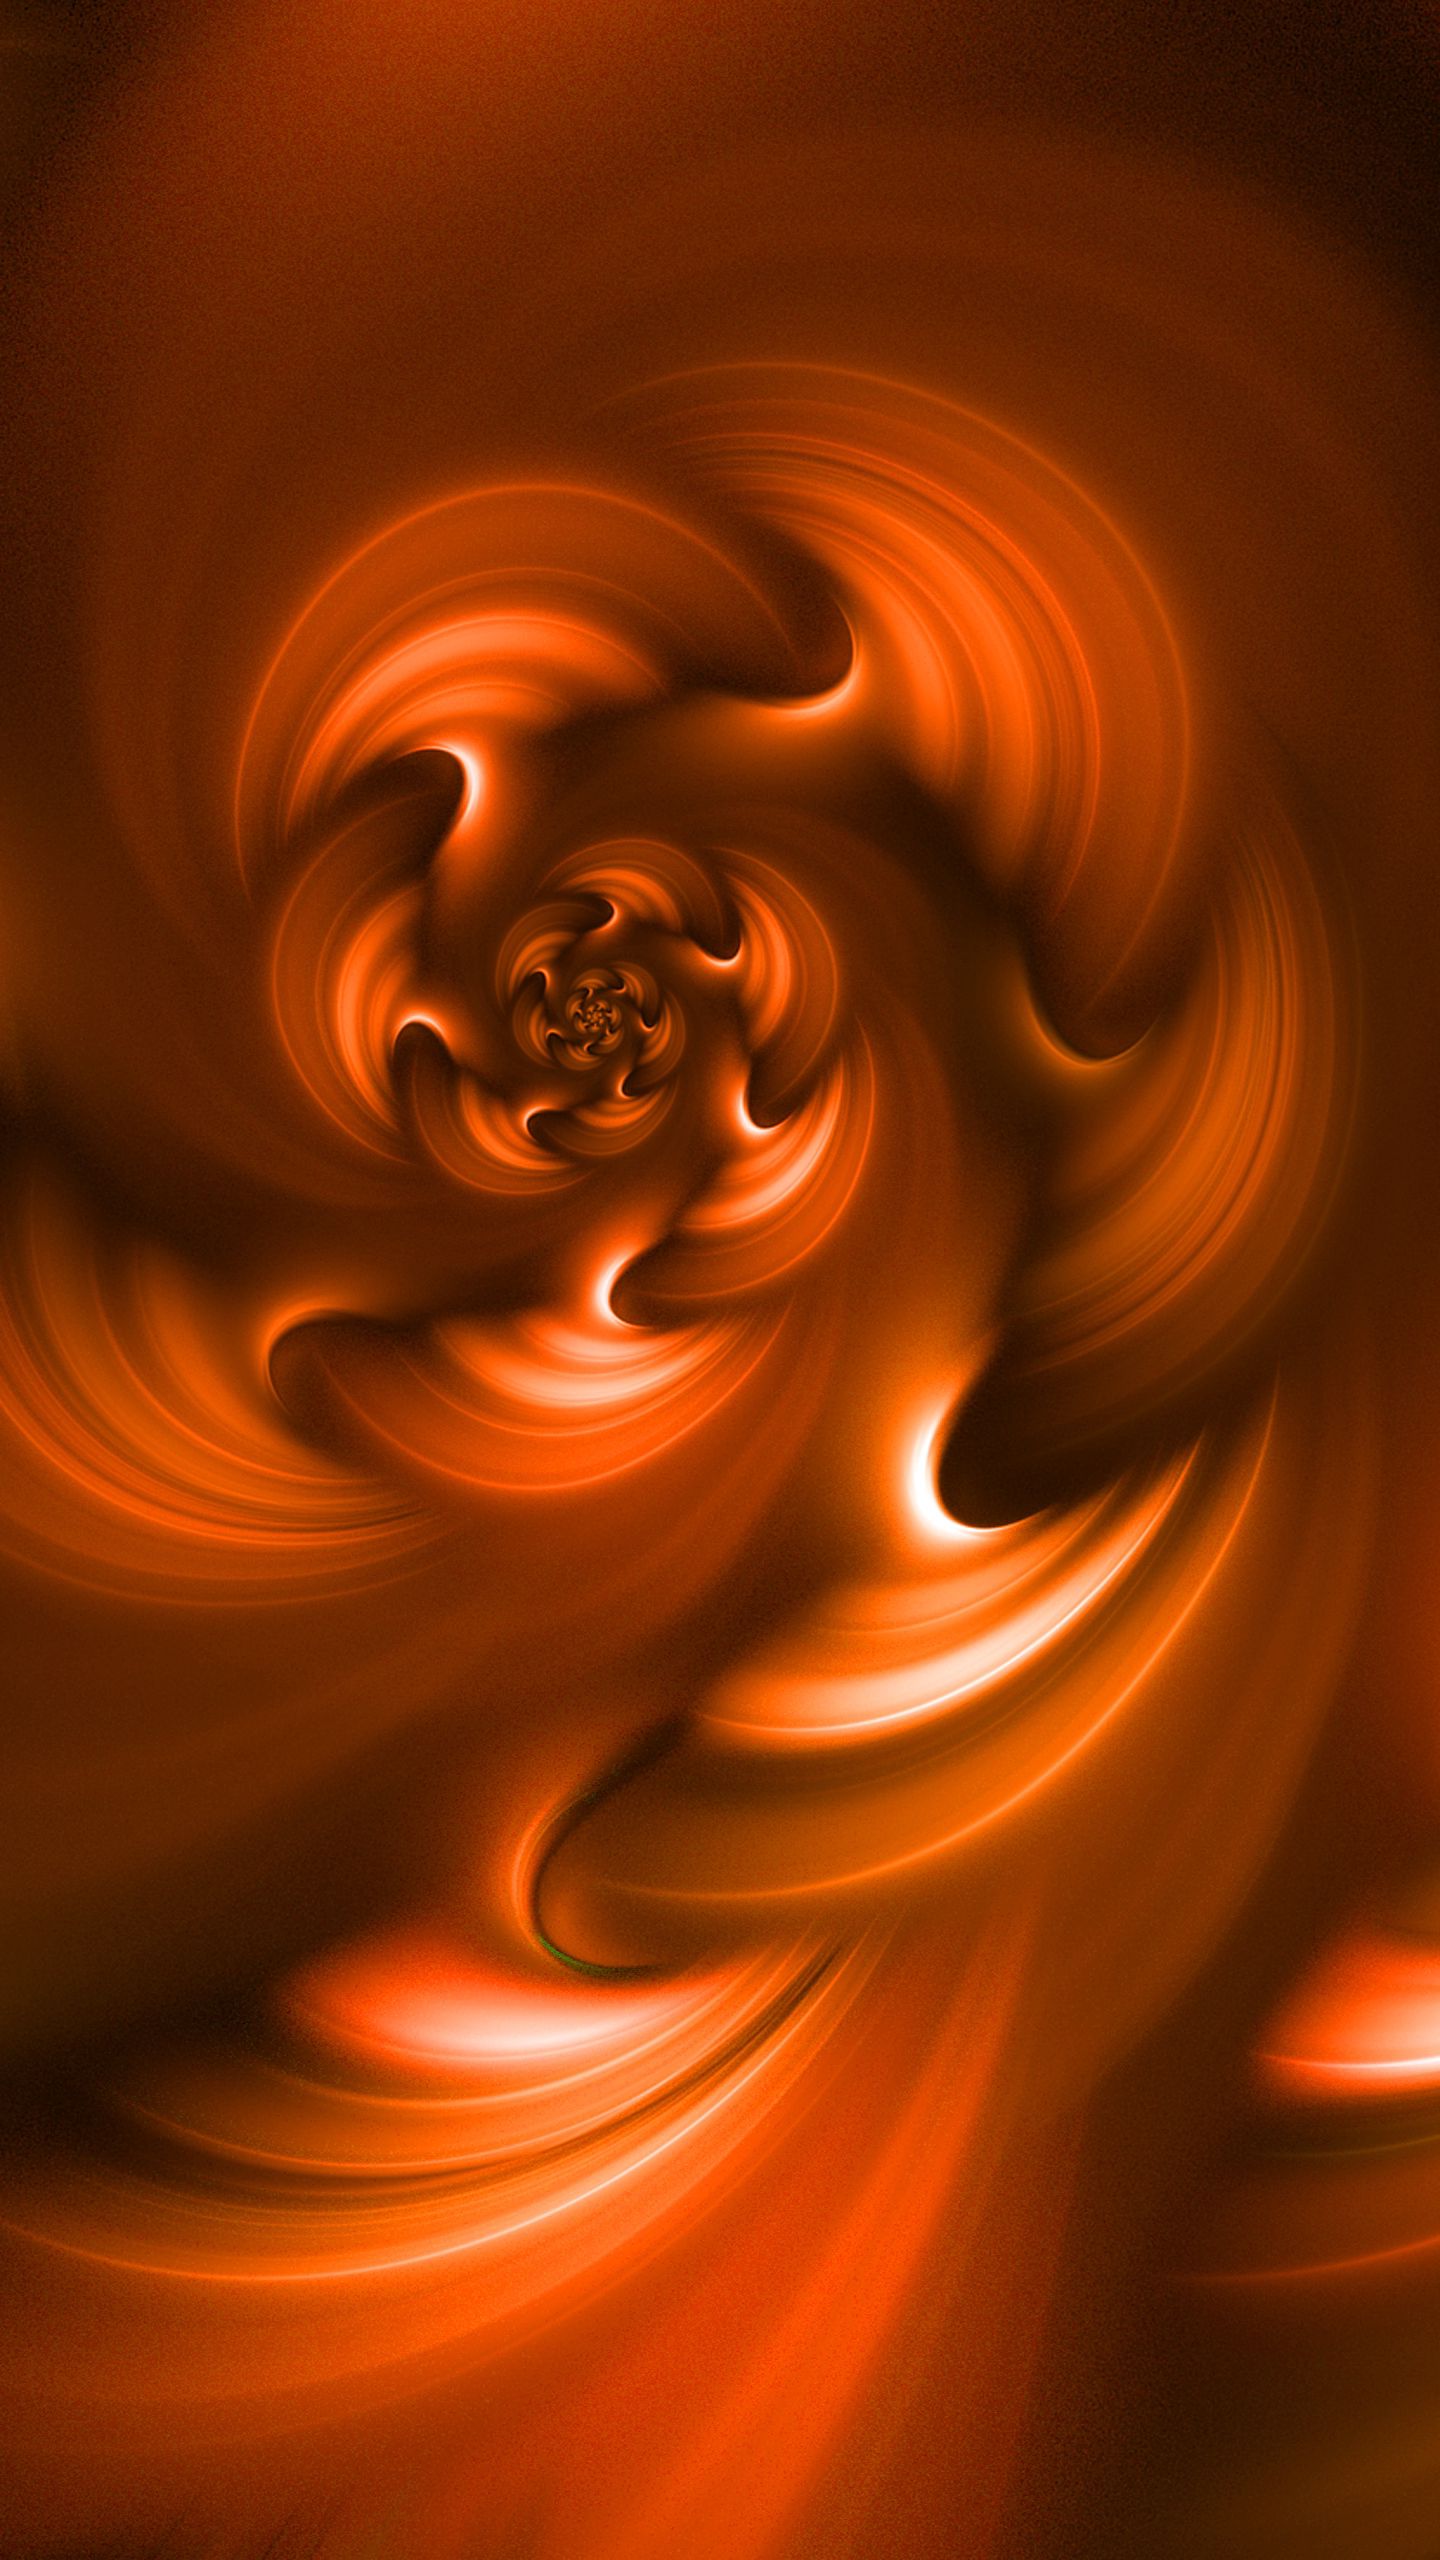 abstract, fractal, glow, spiral, flaming, swirling, involute, fiery